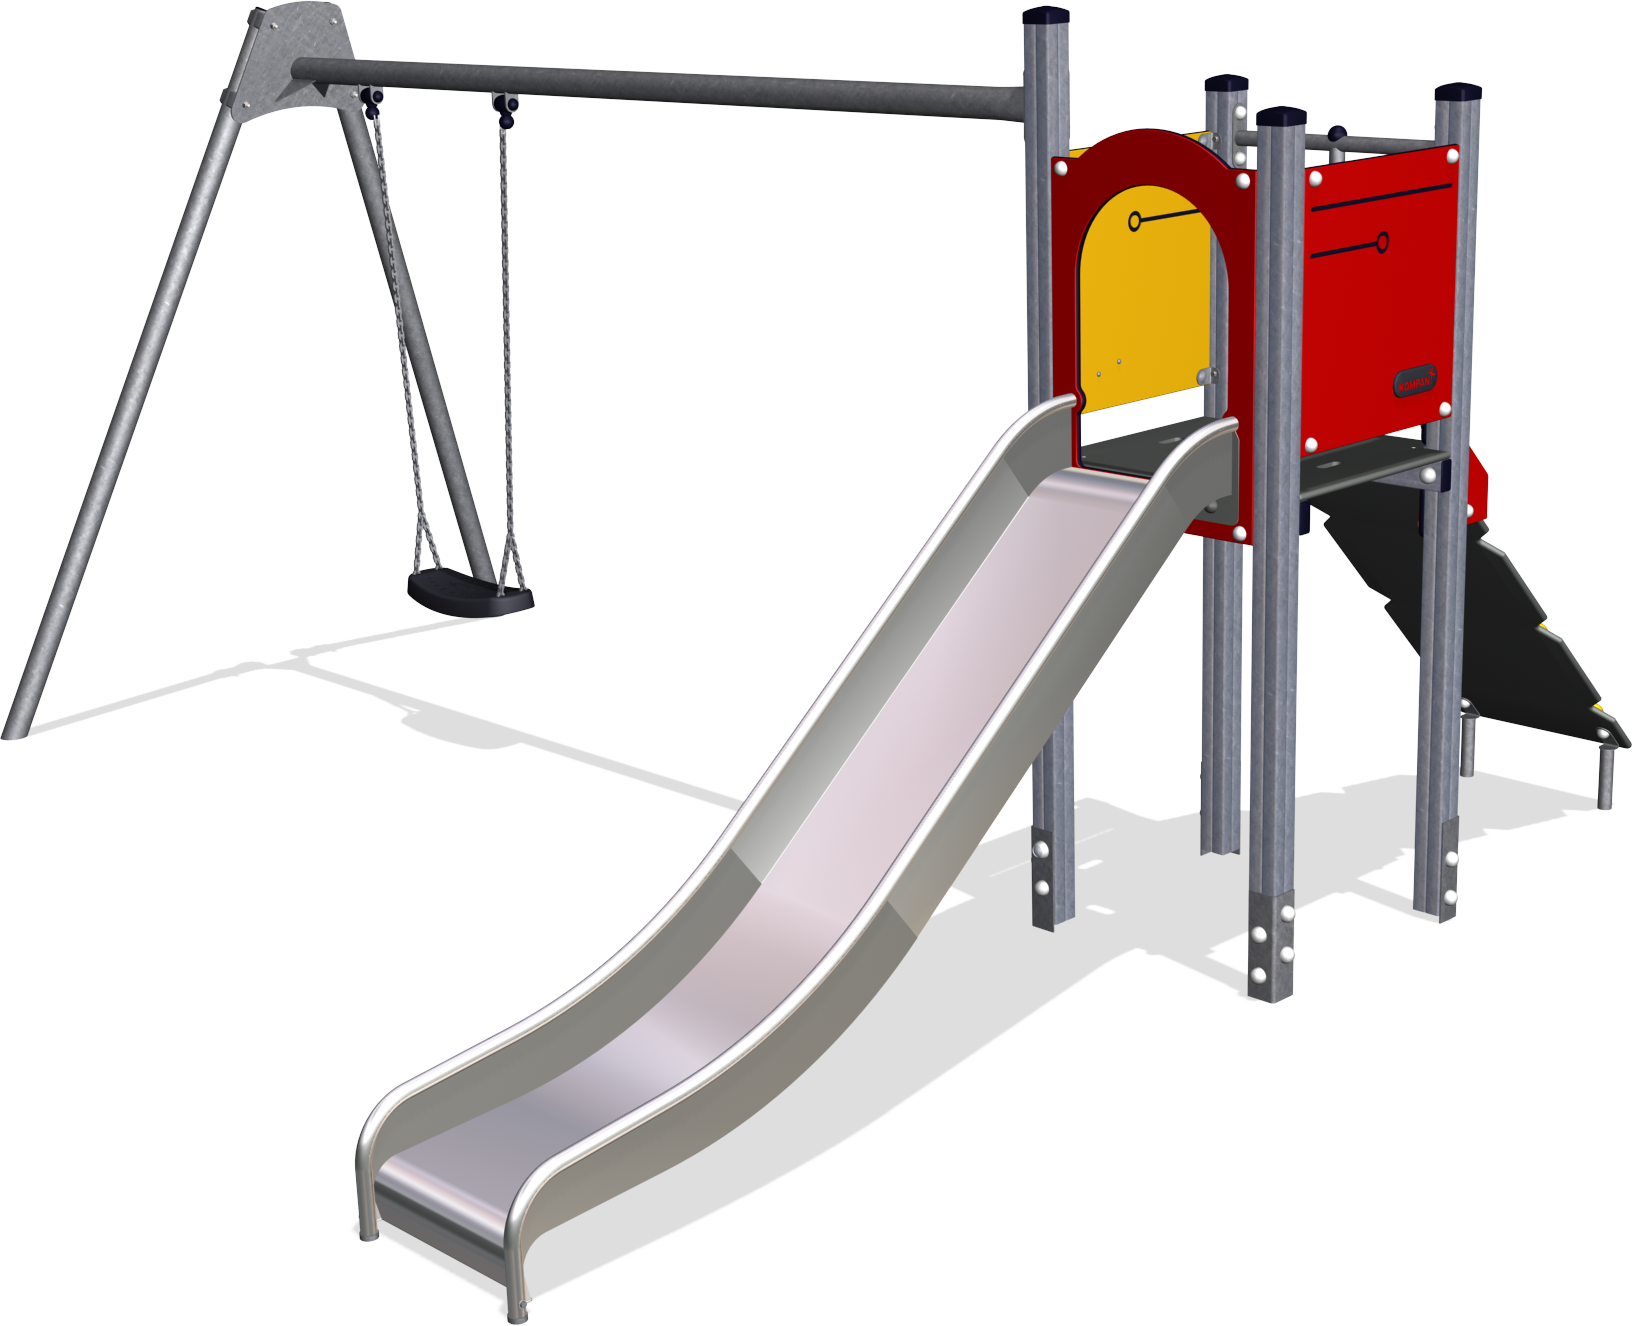 Slide drawing at getdrawings. Park clipart playground